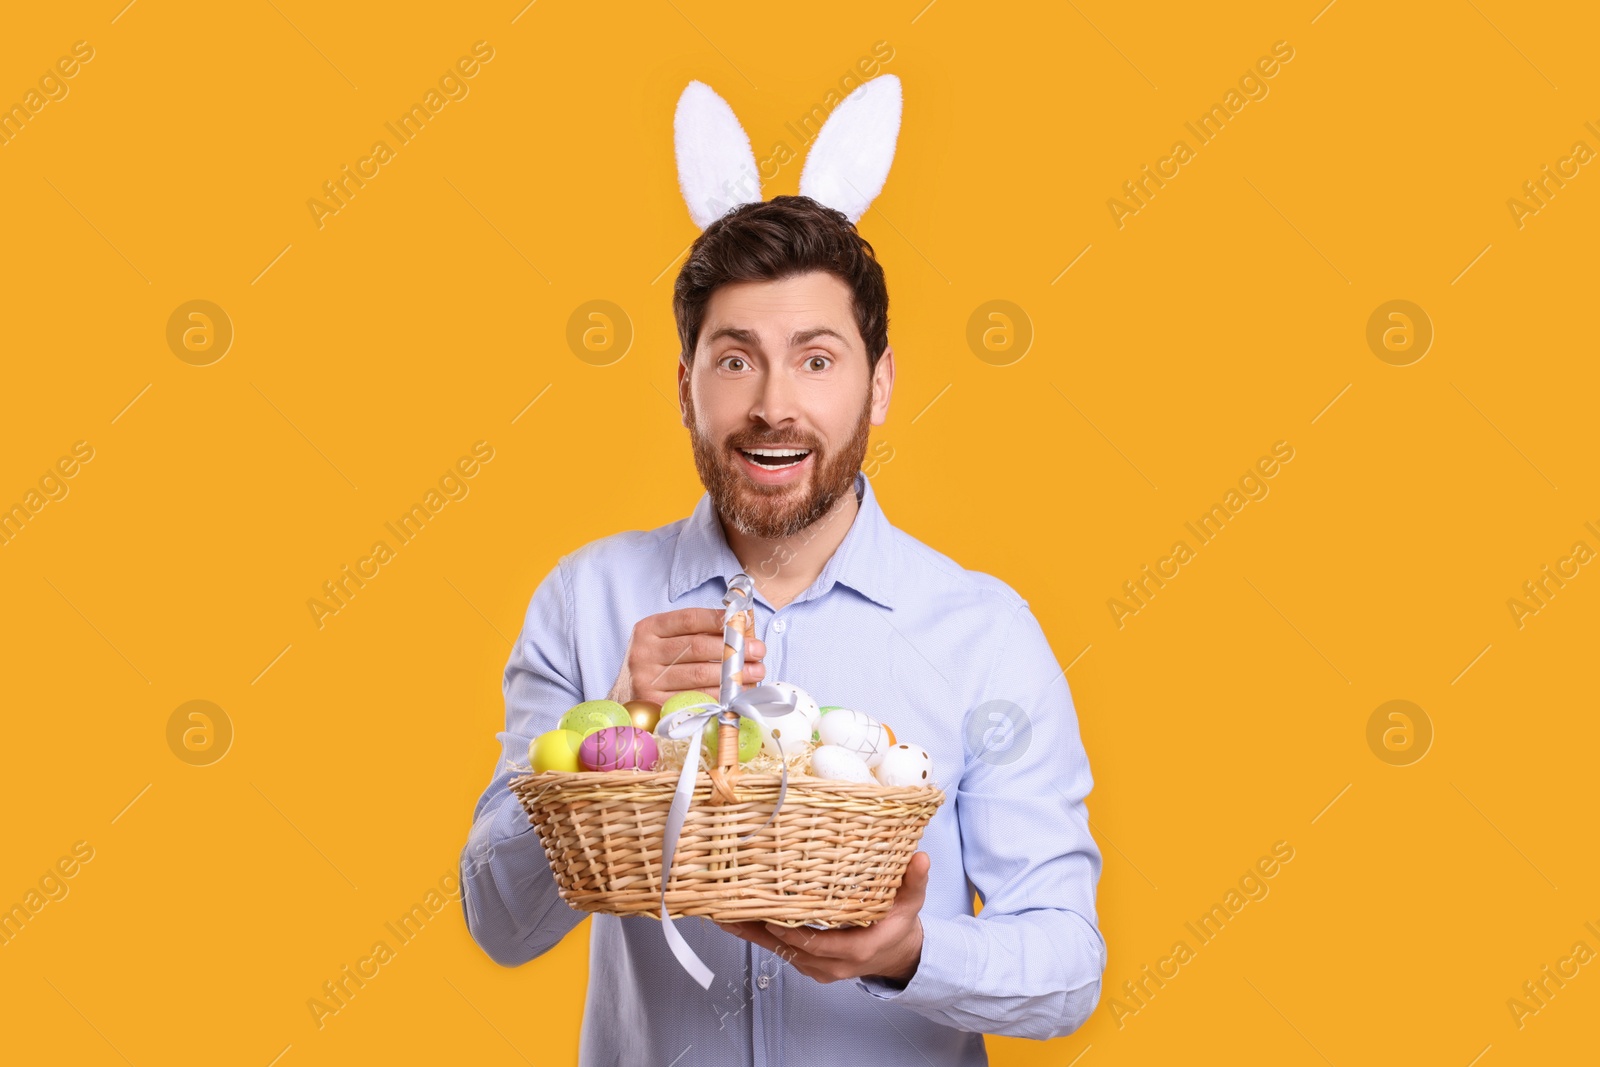 Photo of Portrait of happy man in cute bunny ears headband holding wicker basket with Easter eggs on orange background